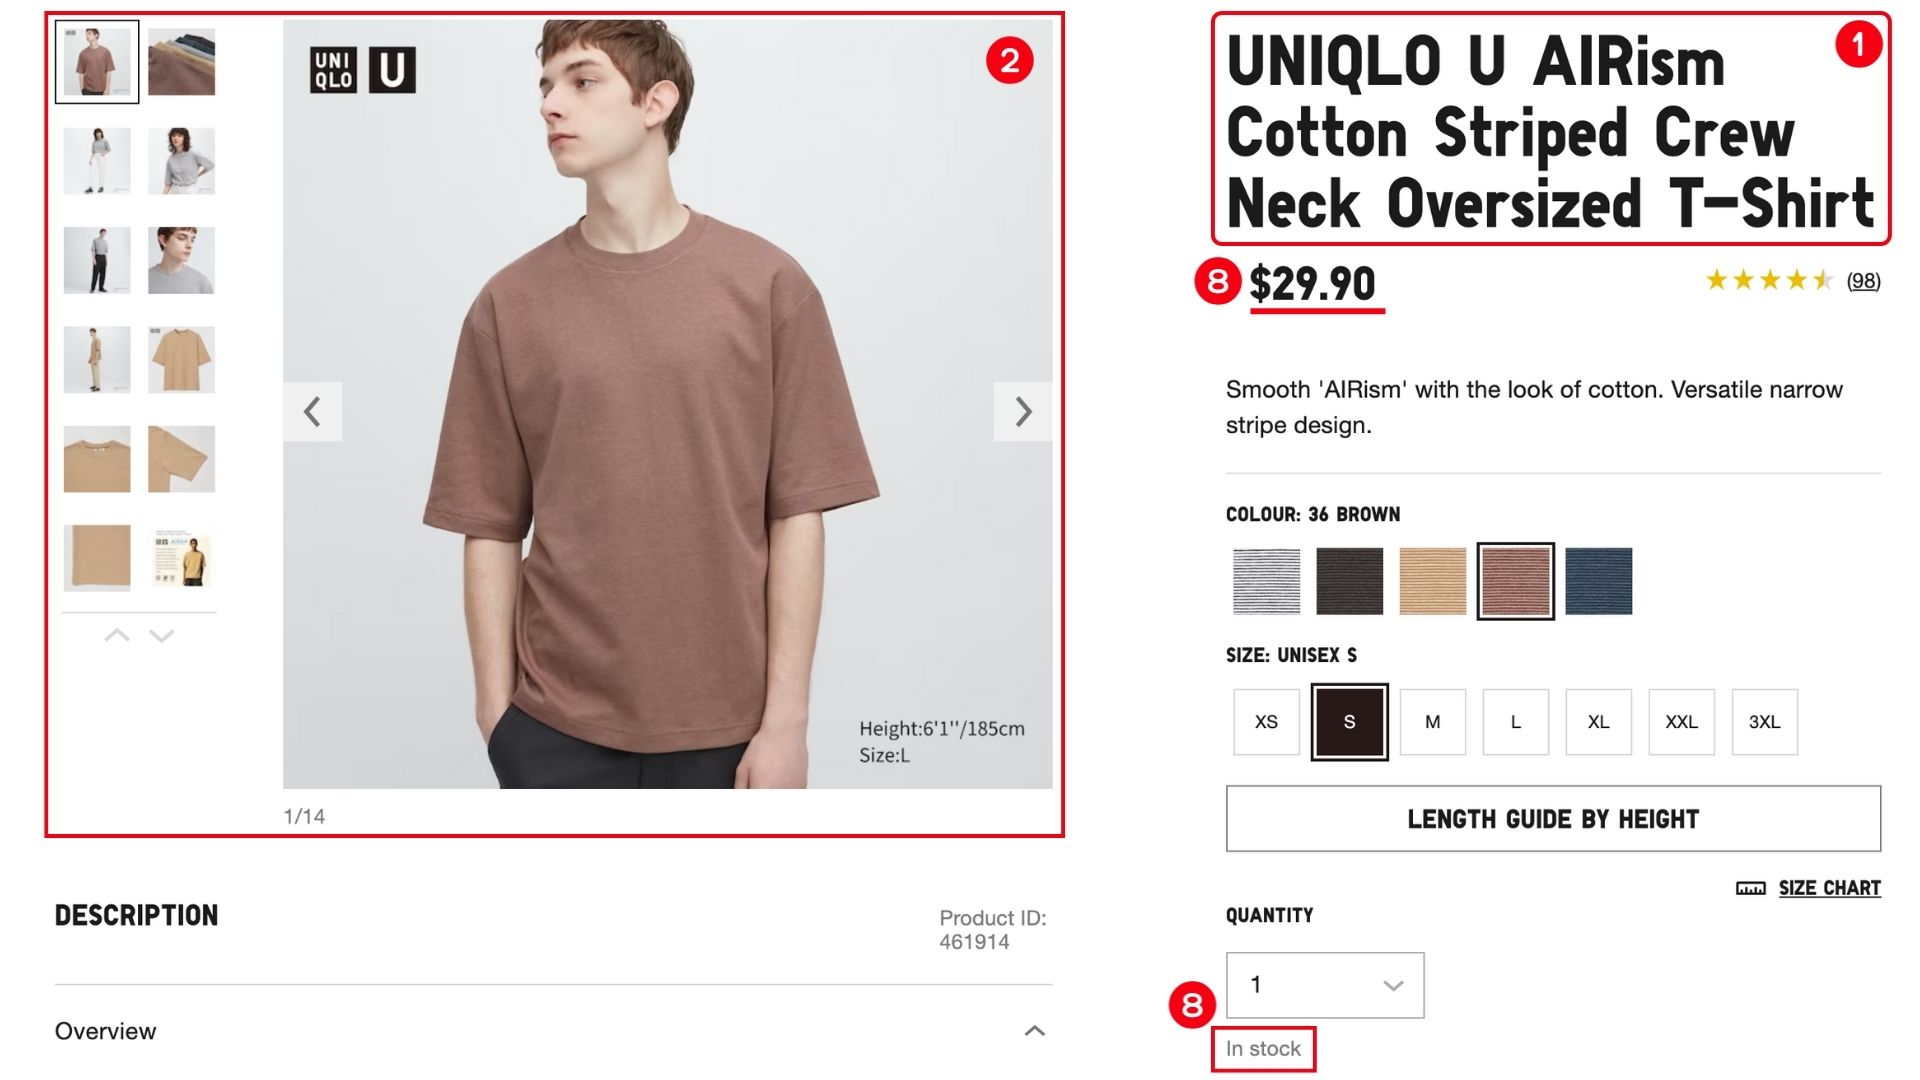 Example of a good product description from Uniqlo.com